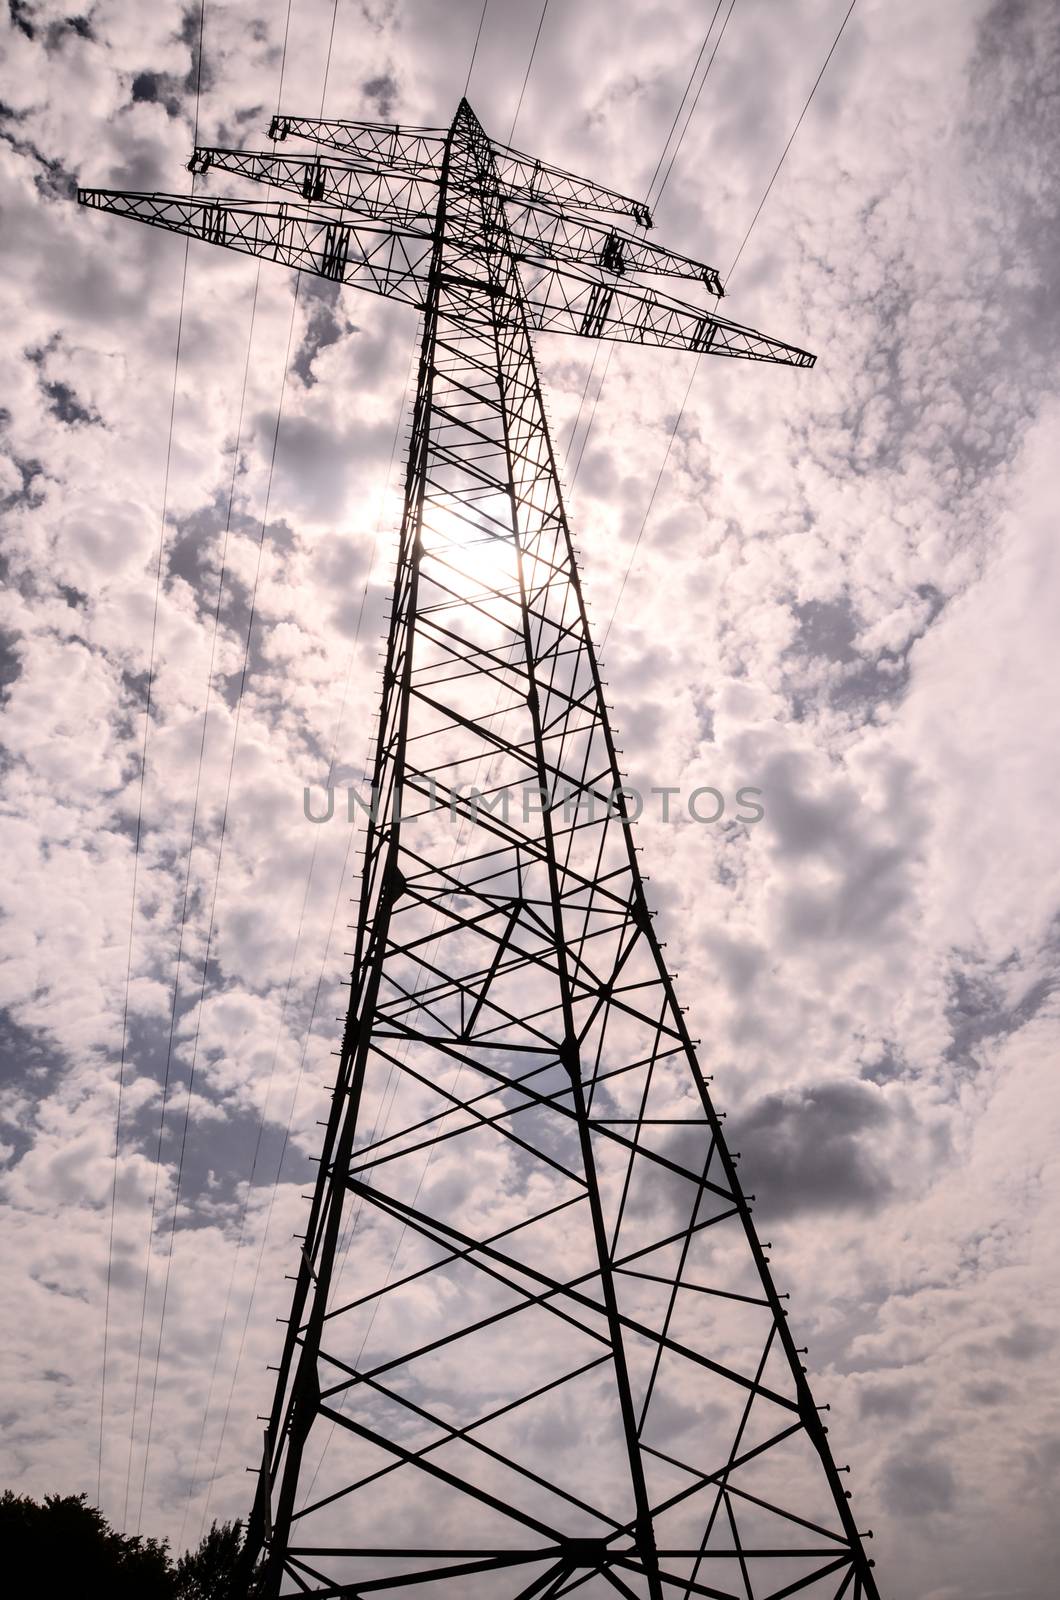 High Voltage Electric Transmission Tower by underworld